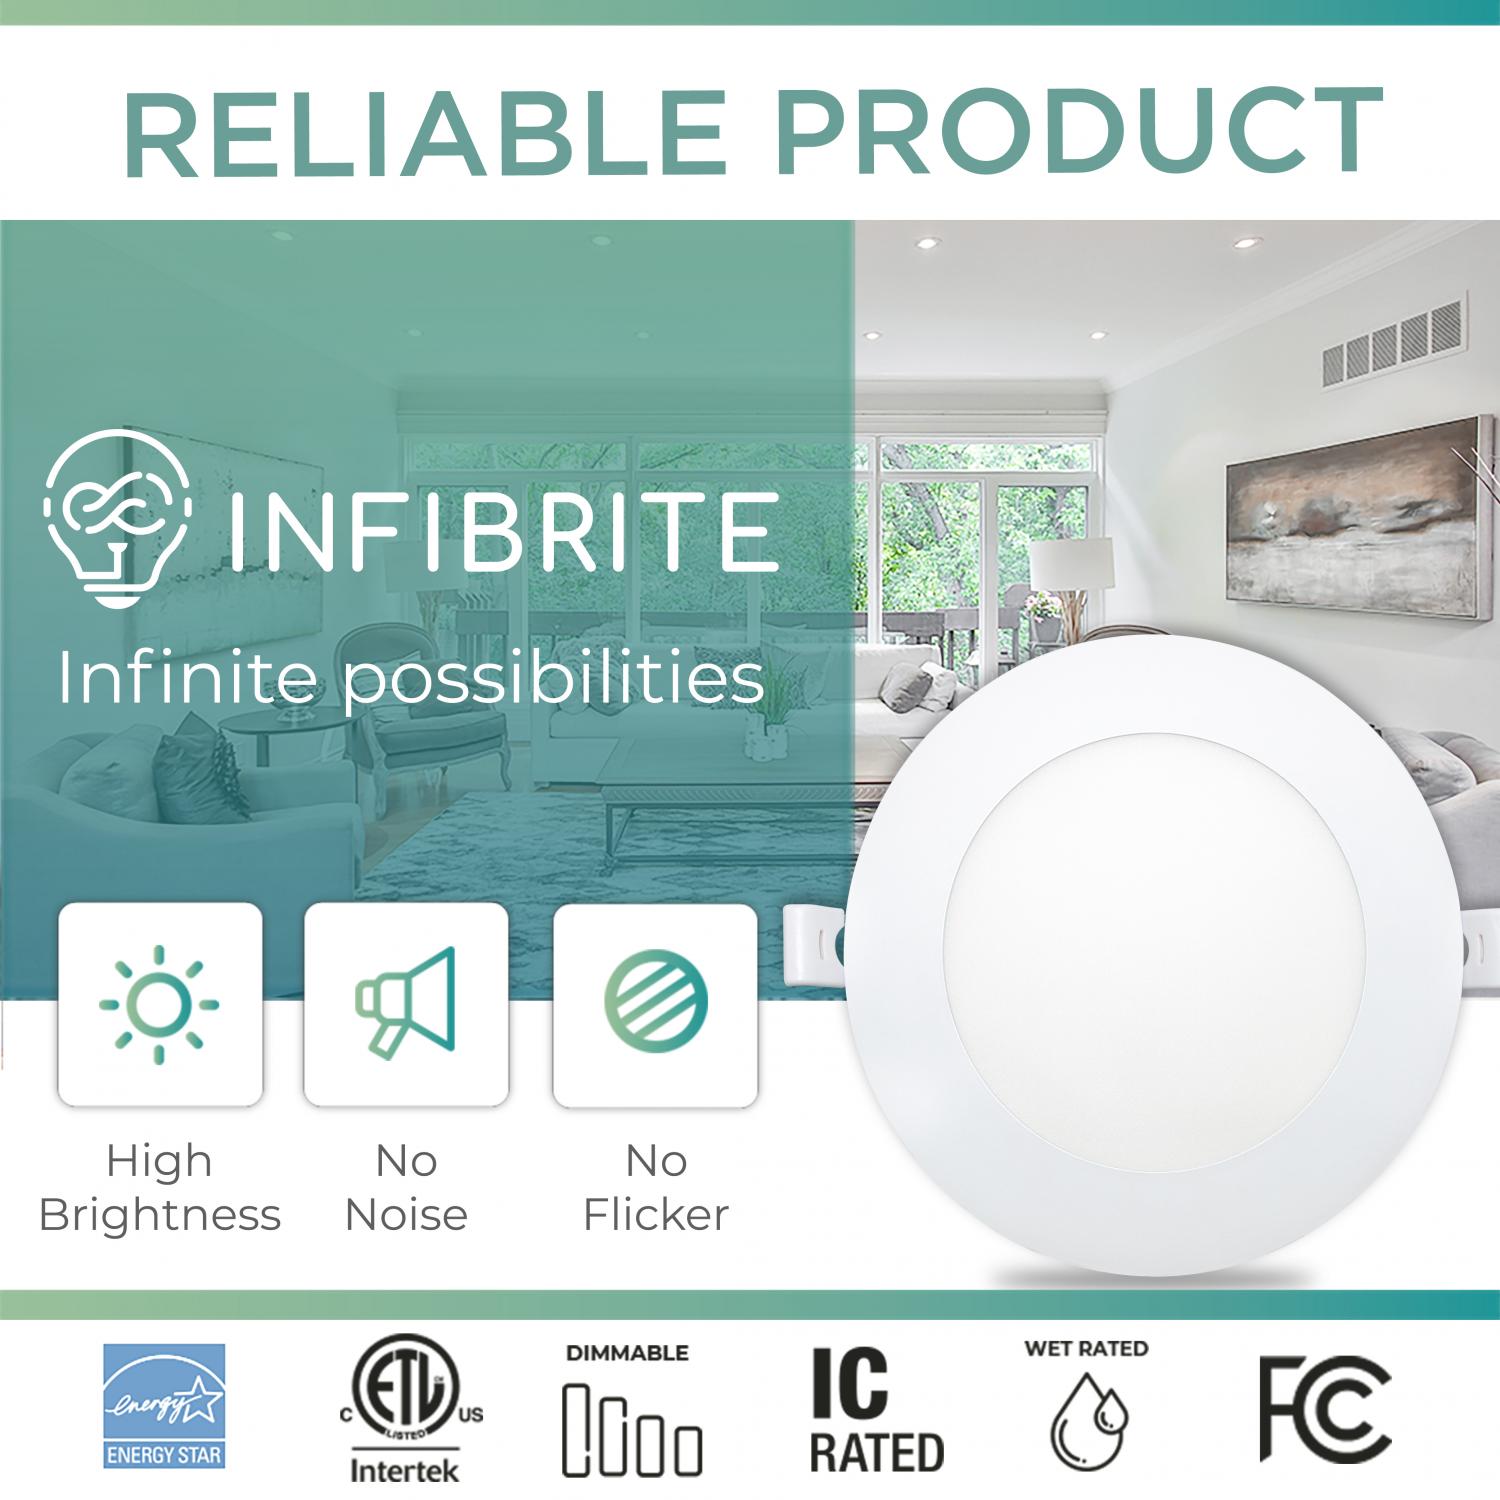 Infibrite 6 Inch 4000K Cool White 12W 1050LM Ultra-Slim LED Ceiling Light with Junction Box, Flush Mount, Dimmable, Fixture for Bedroom, Wet Rated for Bathroom, Easy Install, 110W Eqv, ETL & Energy Star, US Company (12 Pack)